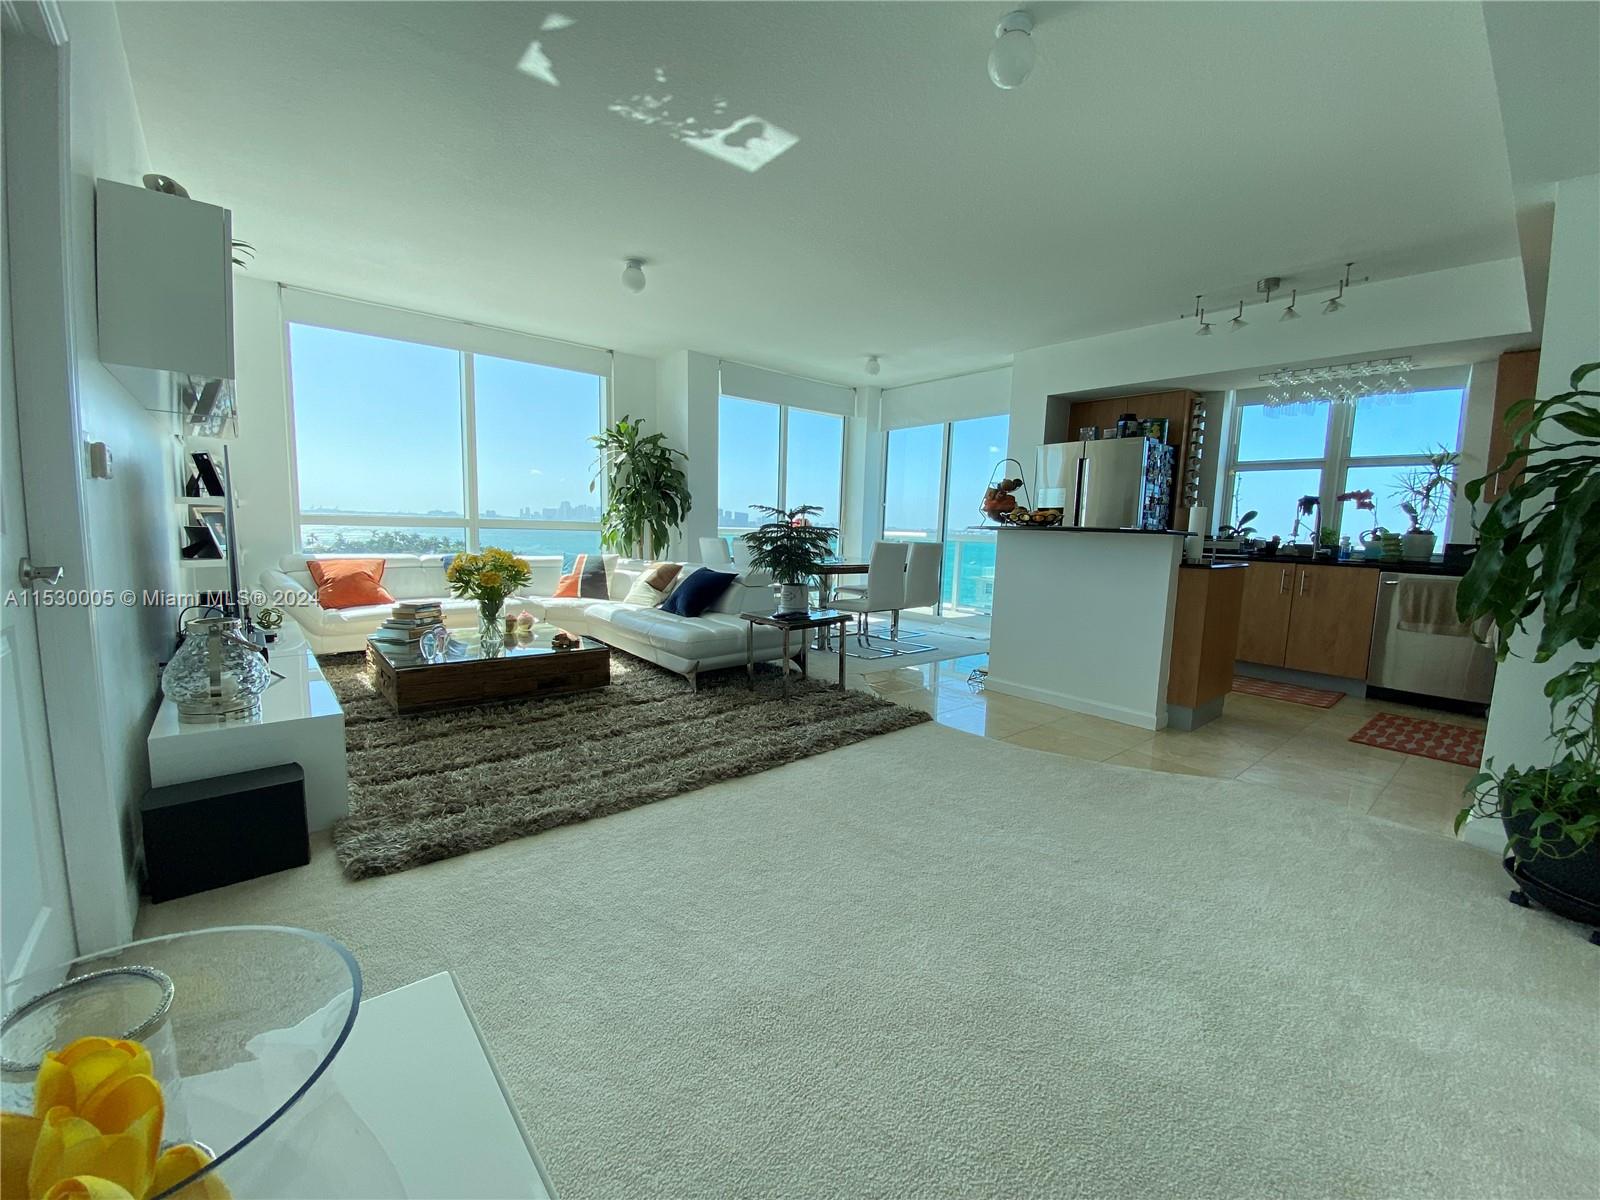 Coastal living in this 2-bedroom condo with a large enclosed Den, 2 bathrooms, and breathtaking views of the Intracoastal Waterway. Located in North Bay Village, this residence offers a serene escape with all the conveniences of city life. Expansive windows showcasing panoramic views of the beautiful Intracoastal Waterway. Balconies with stunning views, perfect for morning coffee or evening relaxation. Amenities include a fitness center, pool, and communal spaces for socializing. It comes with two assigned parking spaces for added convenience.